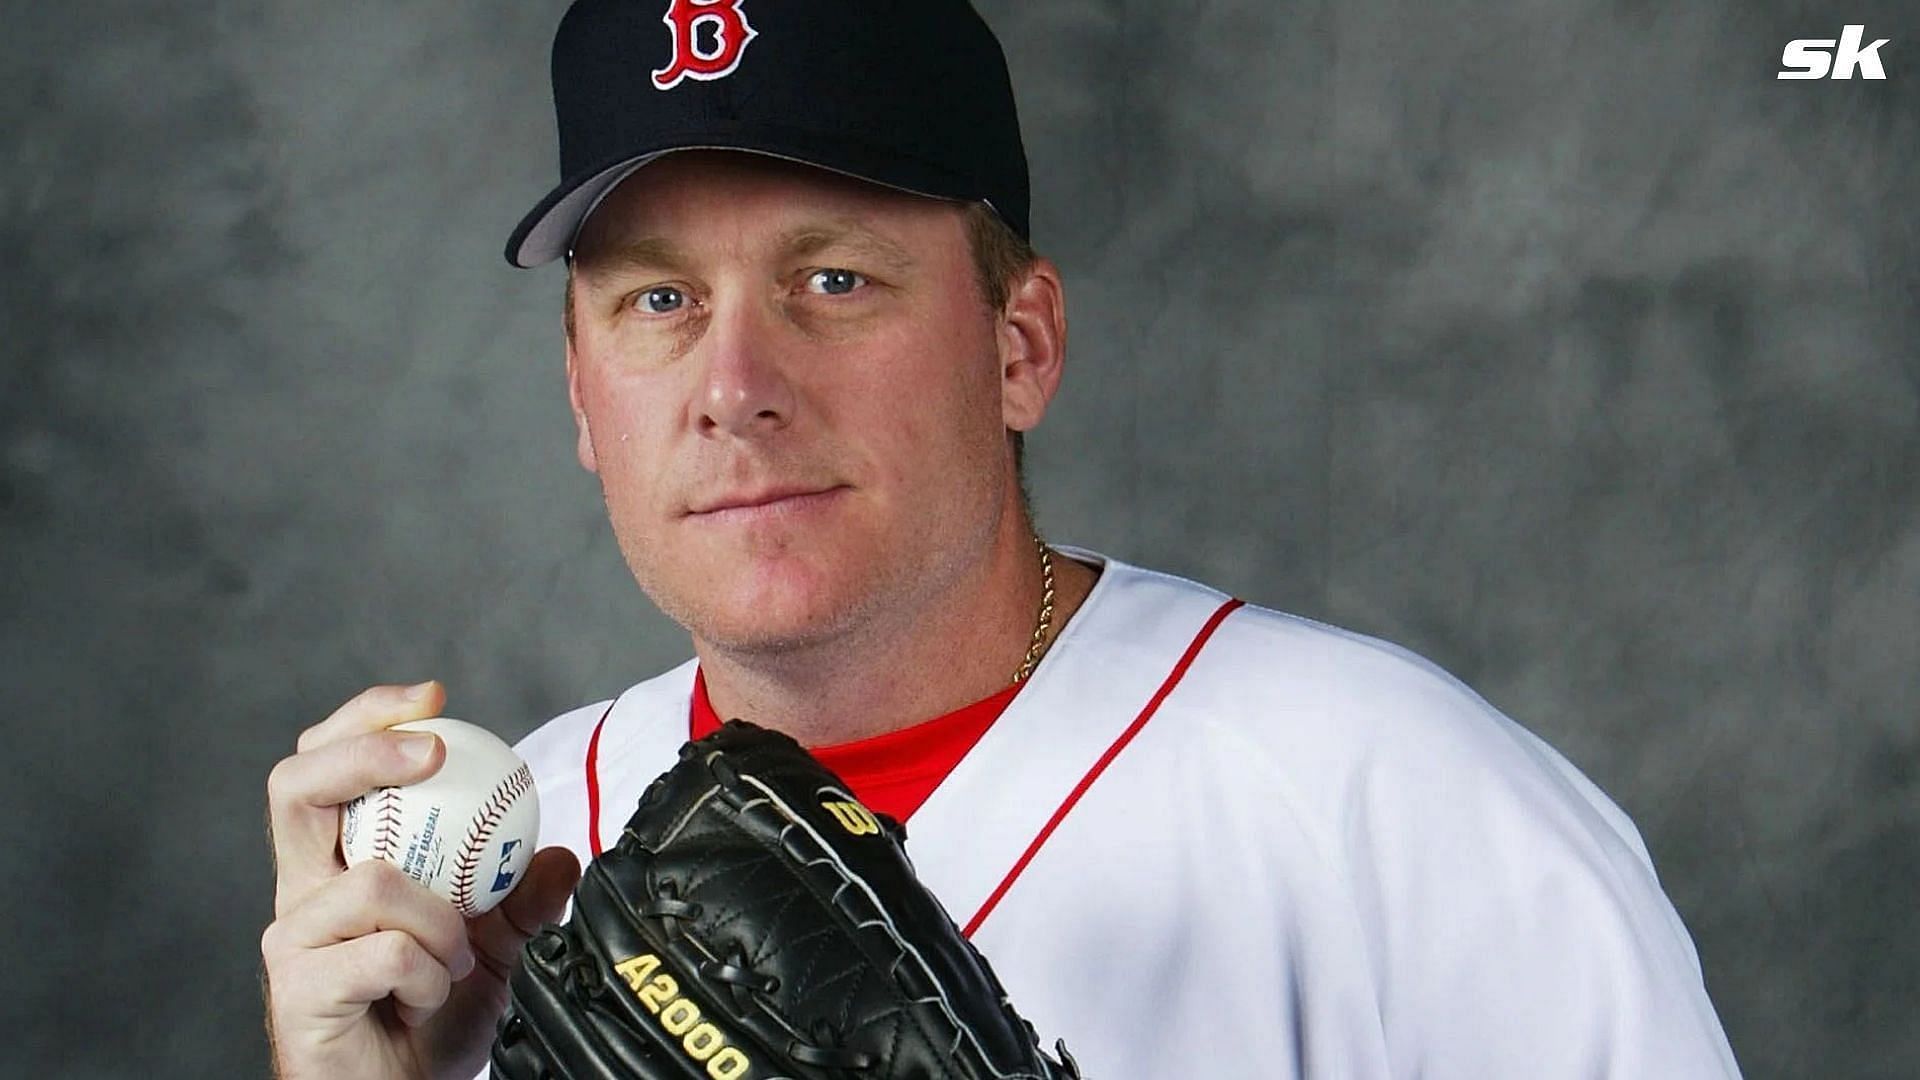 Curt Schilling of the Boston Red Sox (Photo by Jed Jacobsohn/Getty Images)